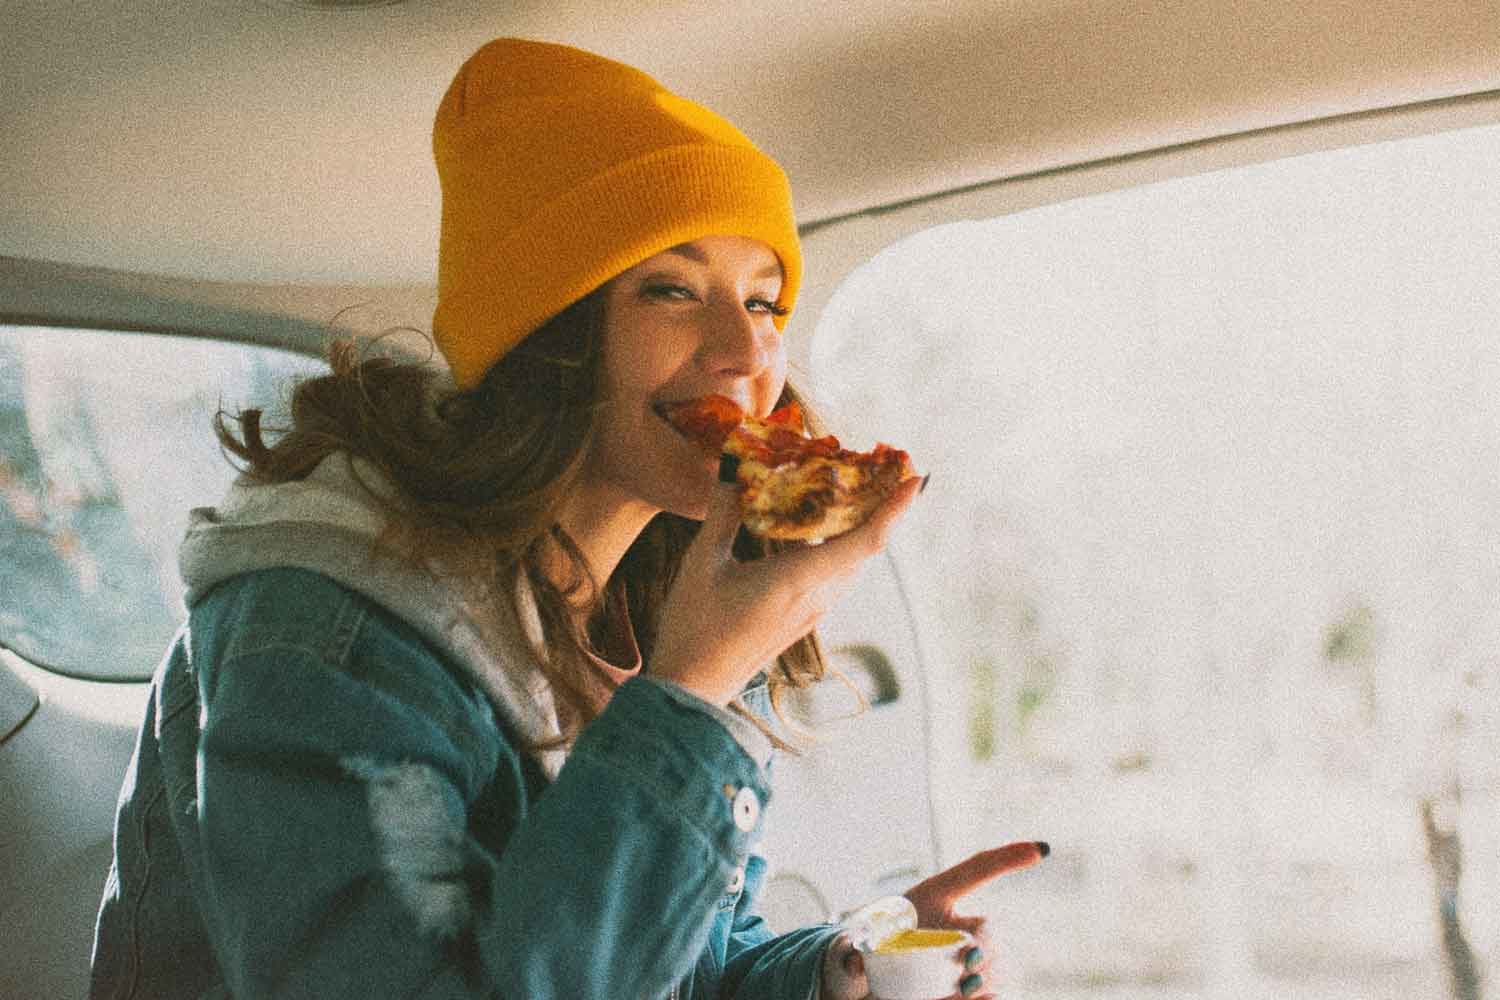 woman eating pizza in car